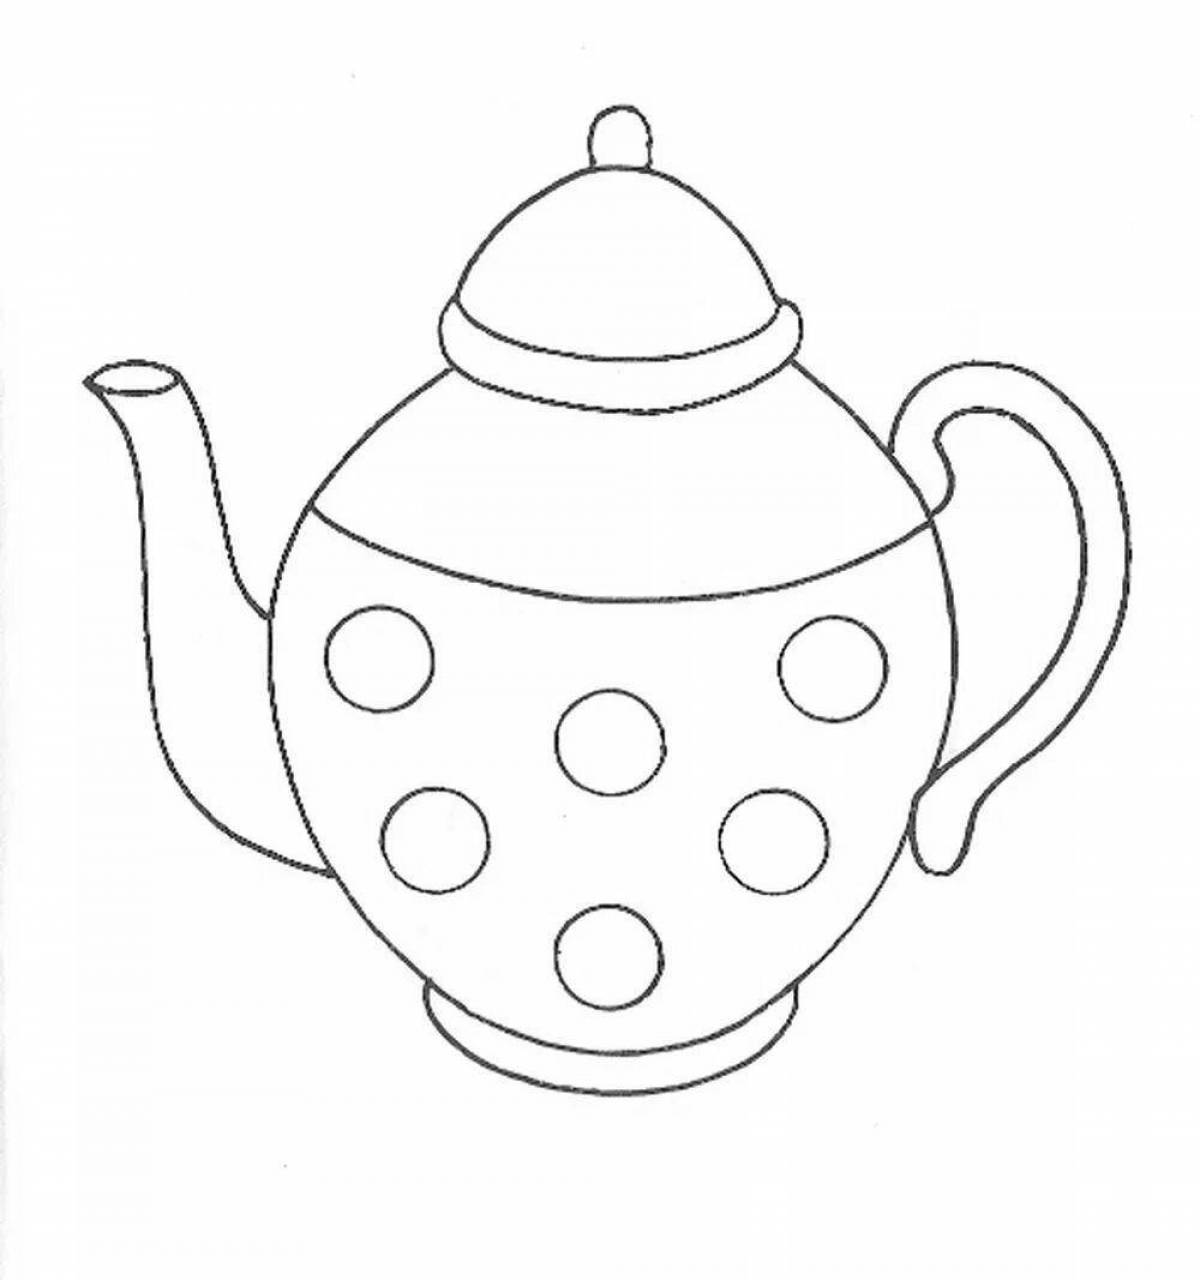 Exciting sugar bowl coloring book for kids